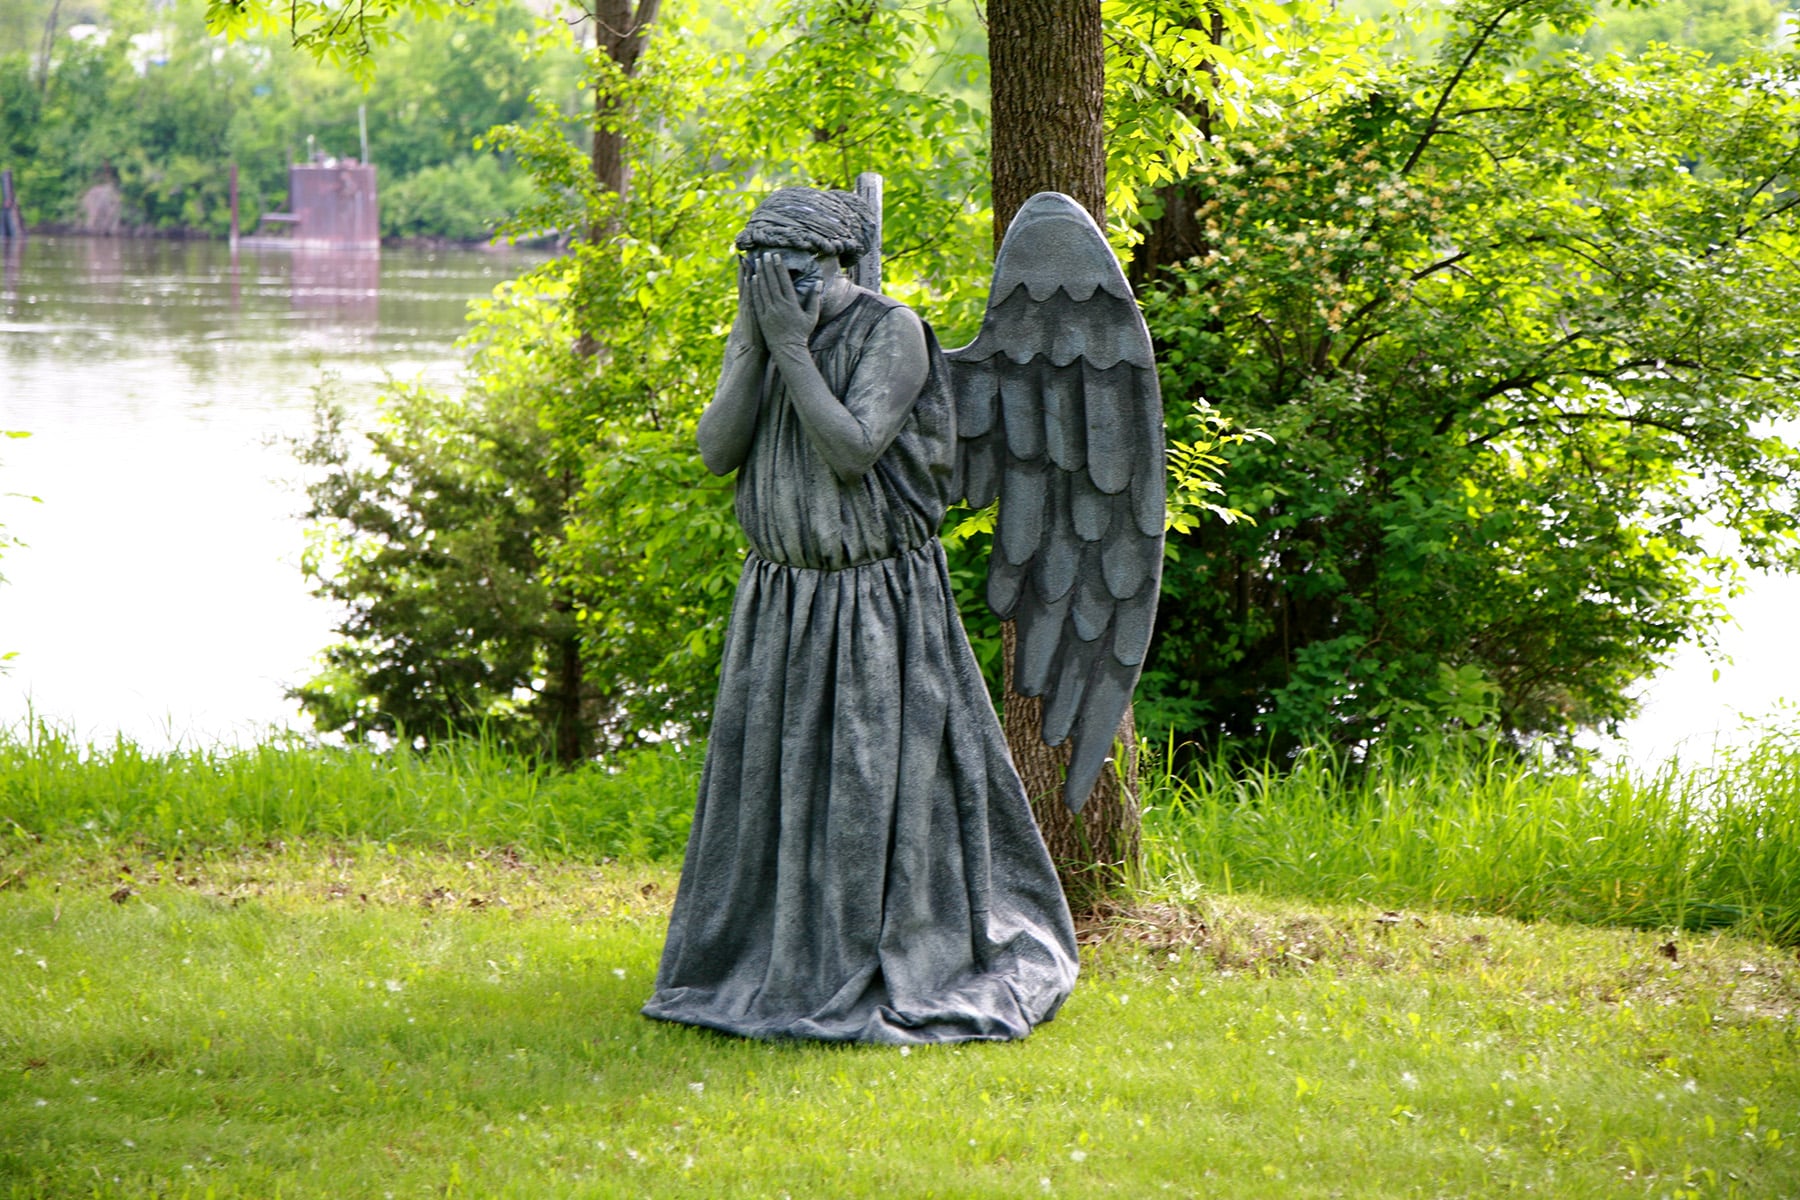 A person dressed as a weeping angel statue in a park.